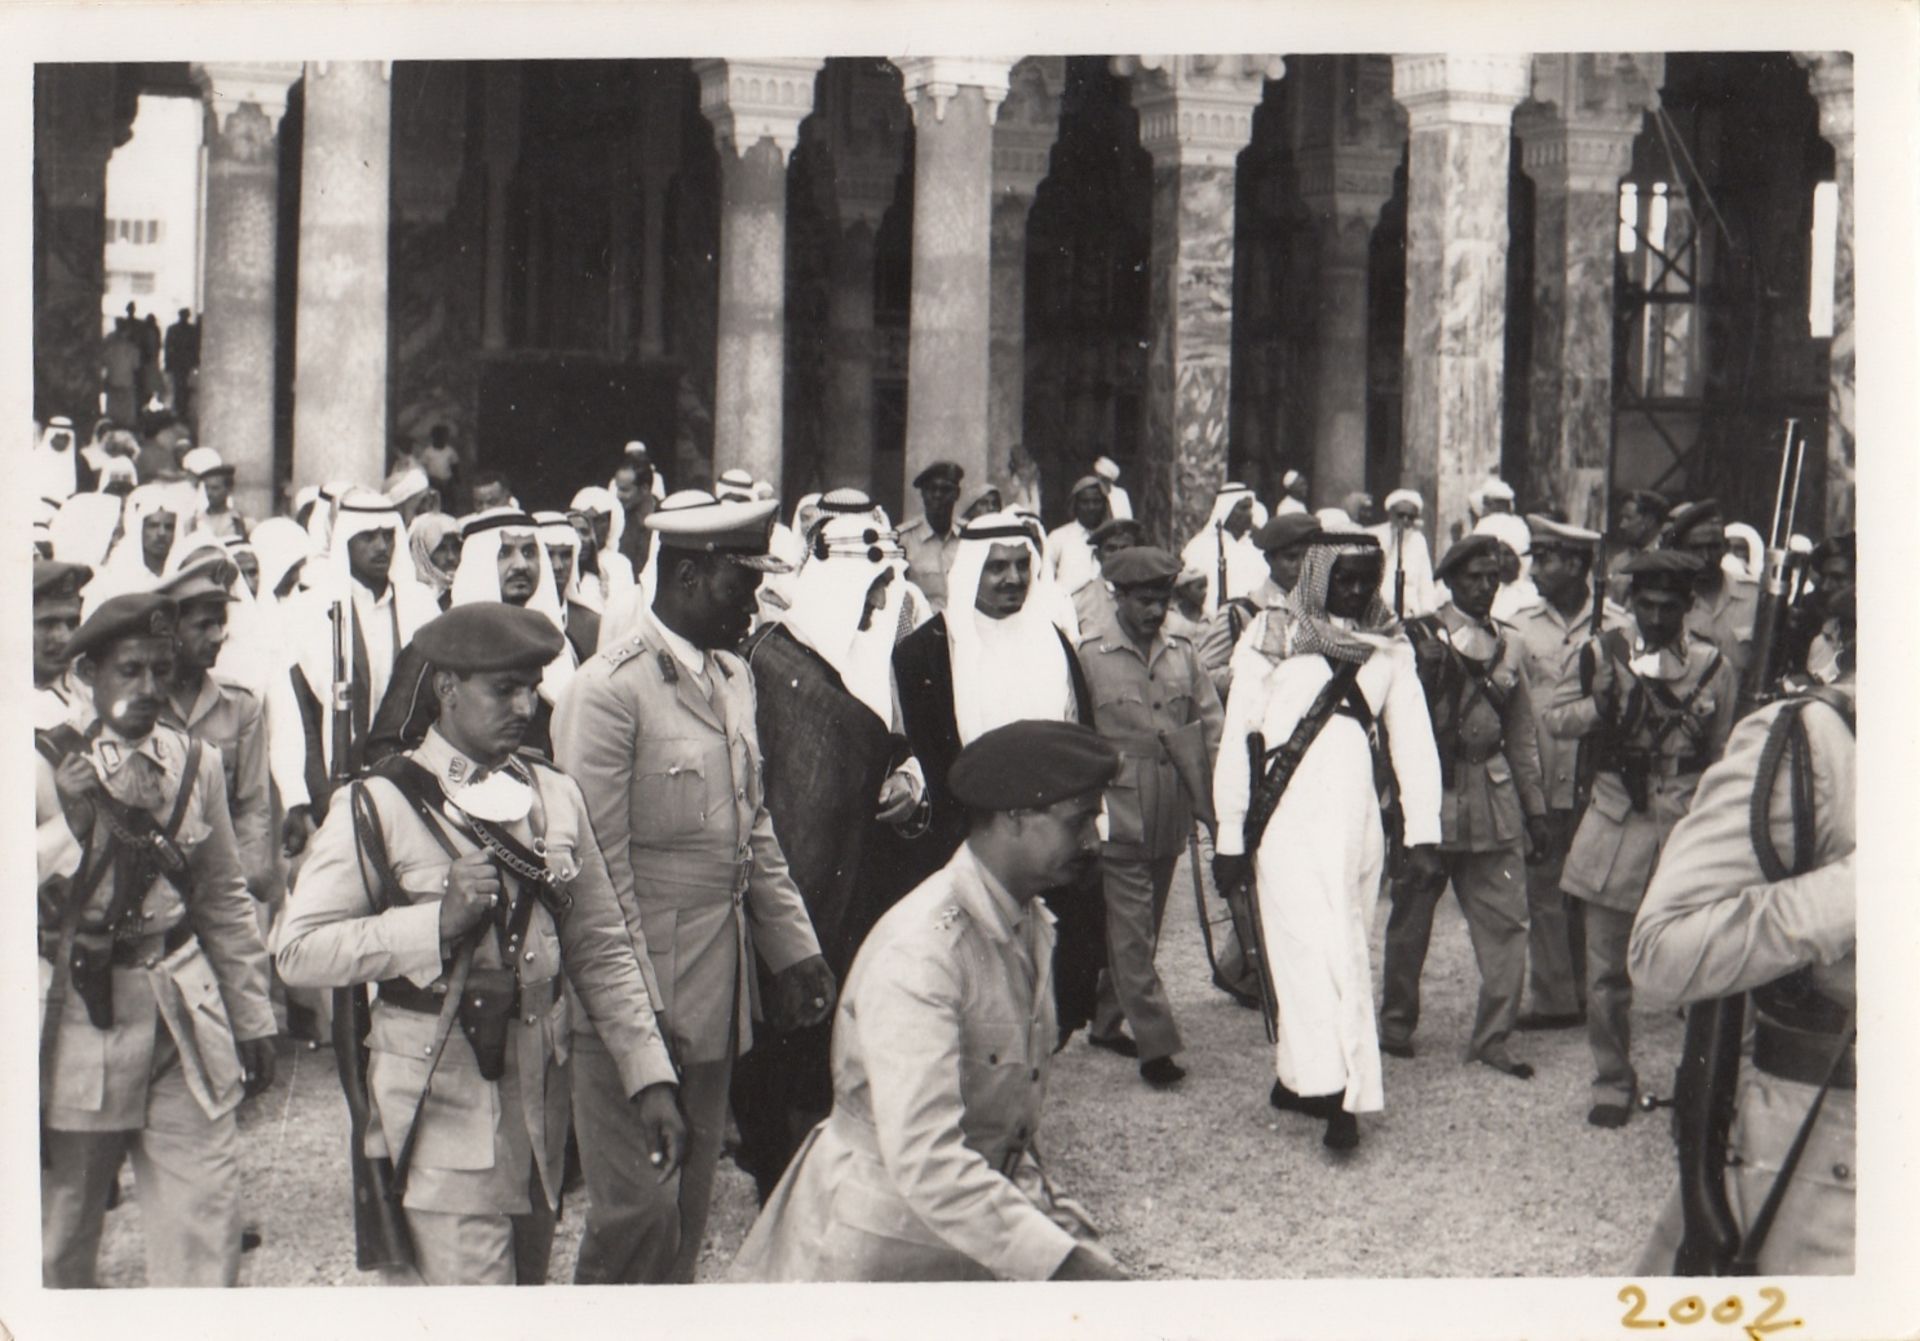 A COLLECTION OF PHOTOGRAPHS OF HIS MAJESTY KING FAISAL BIN ABDUL AZIZ VISITING THE GRAND MOSQUES OF - Image 4 of 24